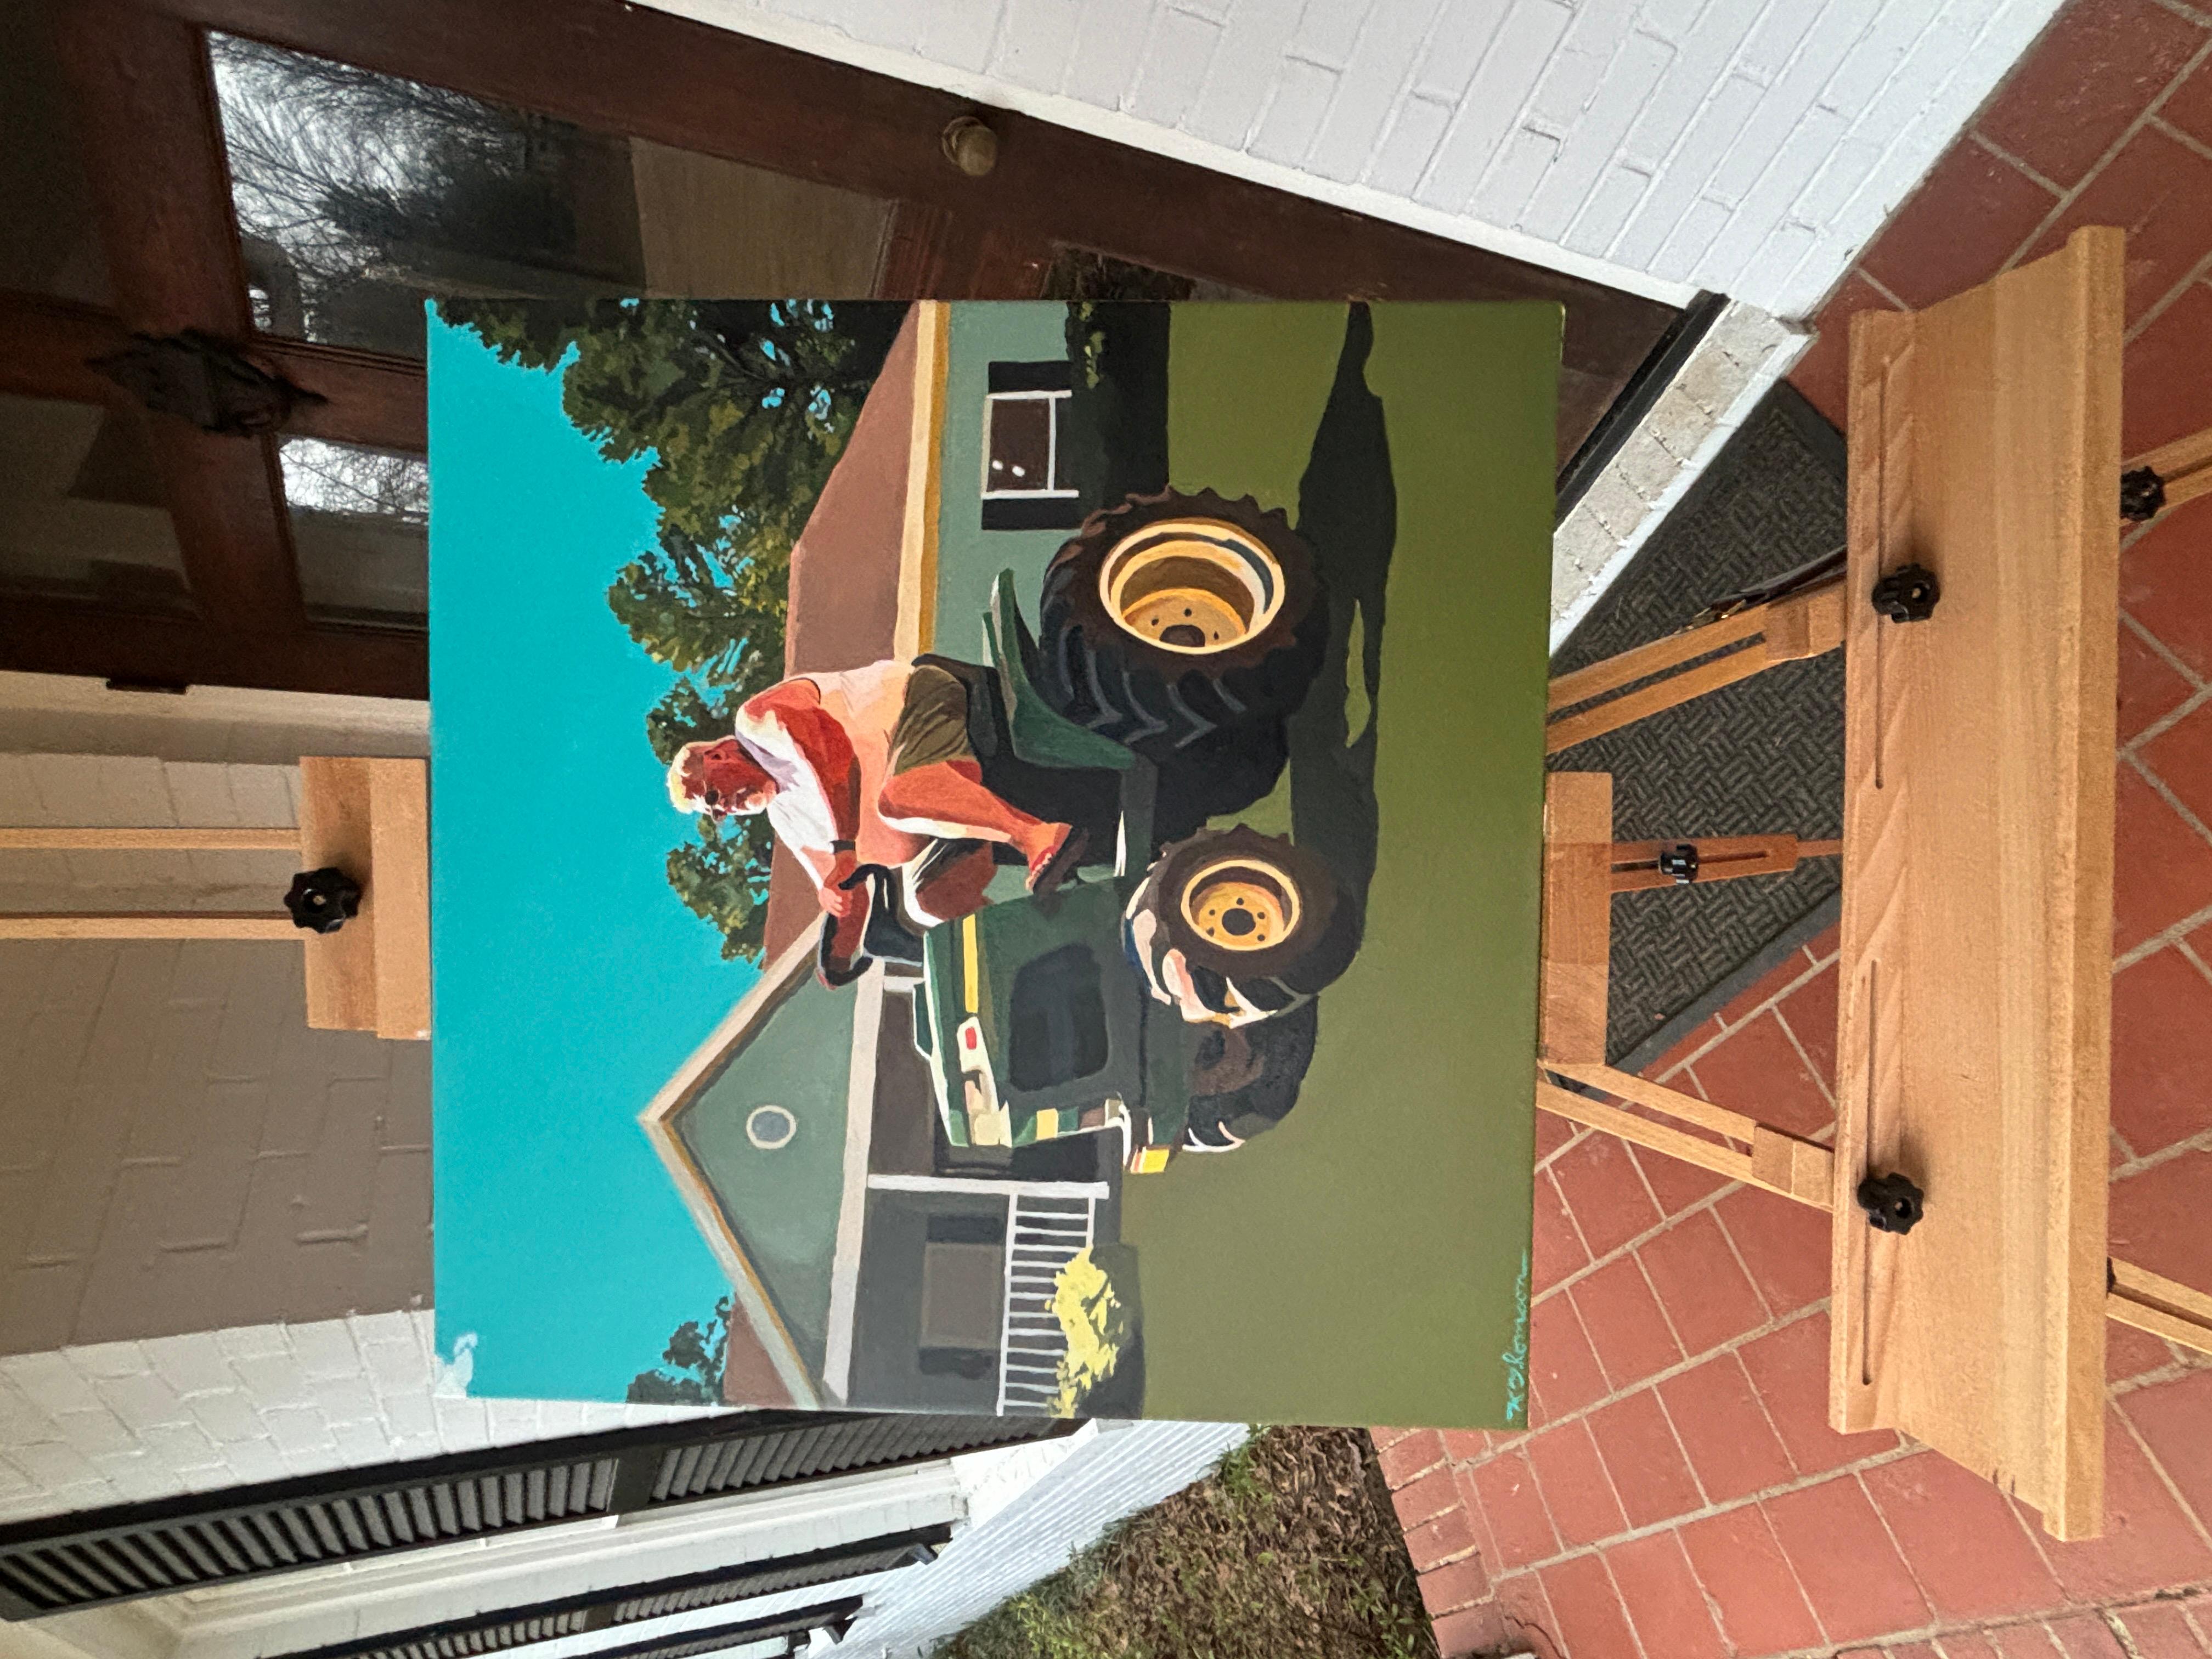 <p>Artist Comments<br>Under the bright sun, a proud homeowner mows his front yard on his customized John Deere lawn tractor. It captures an idealized portrayal of a familiar activity, where people engage in chores with a touch of fun and modernity.